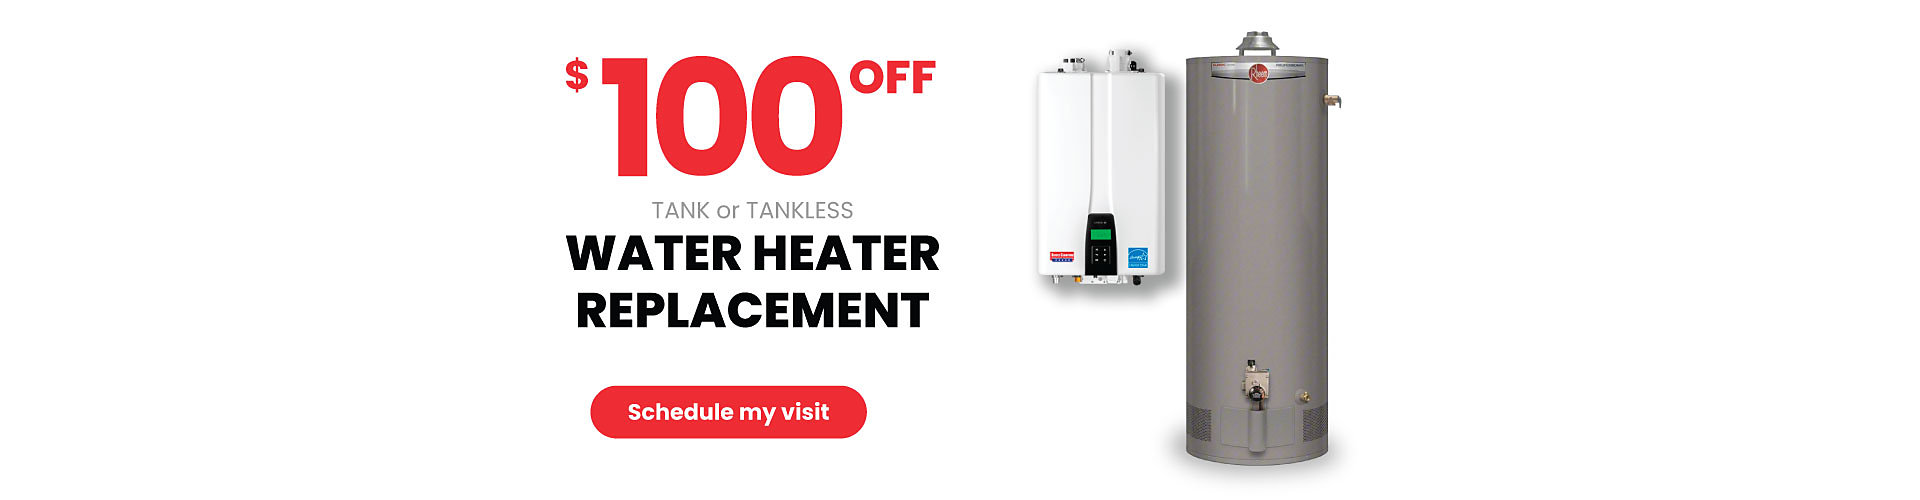 100 OFF Water Heater Replacement